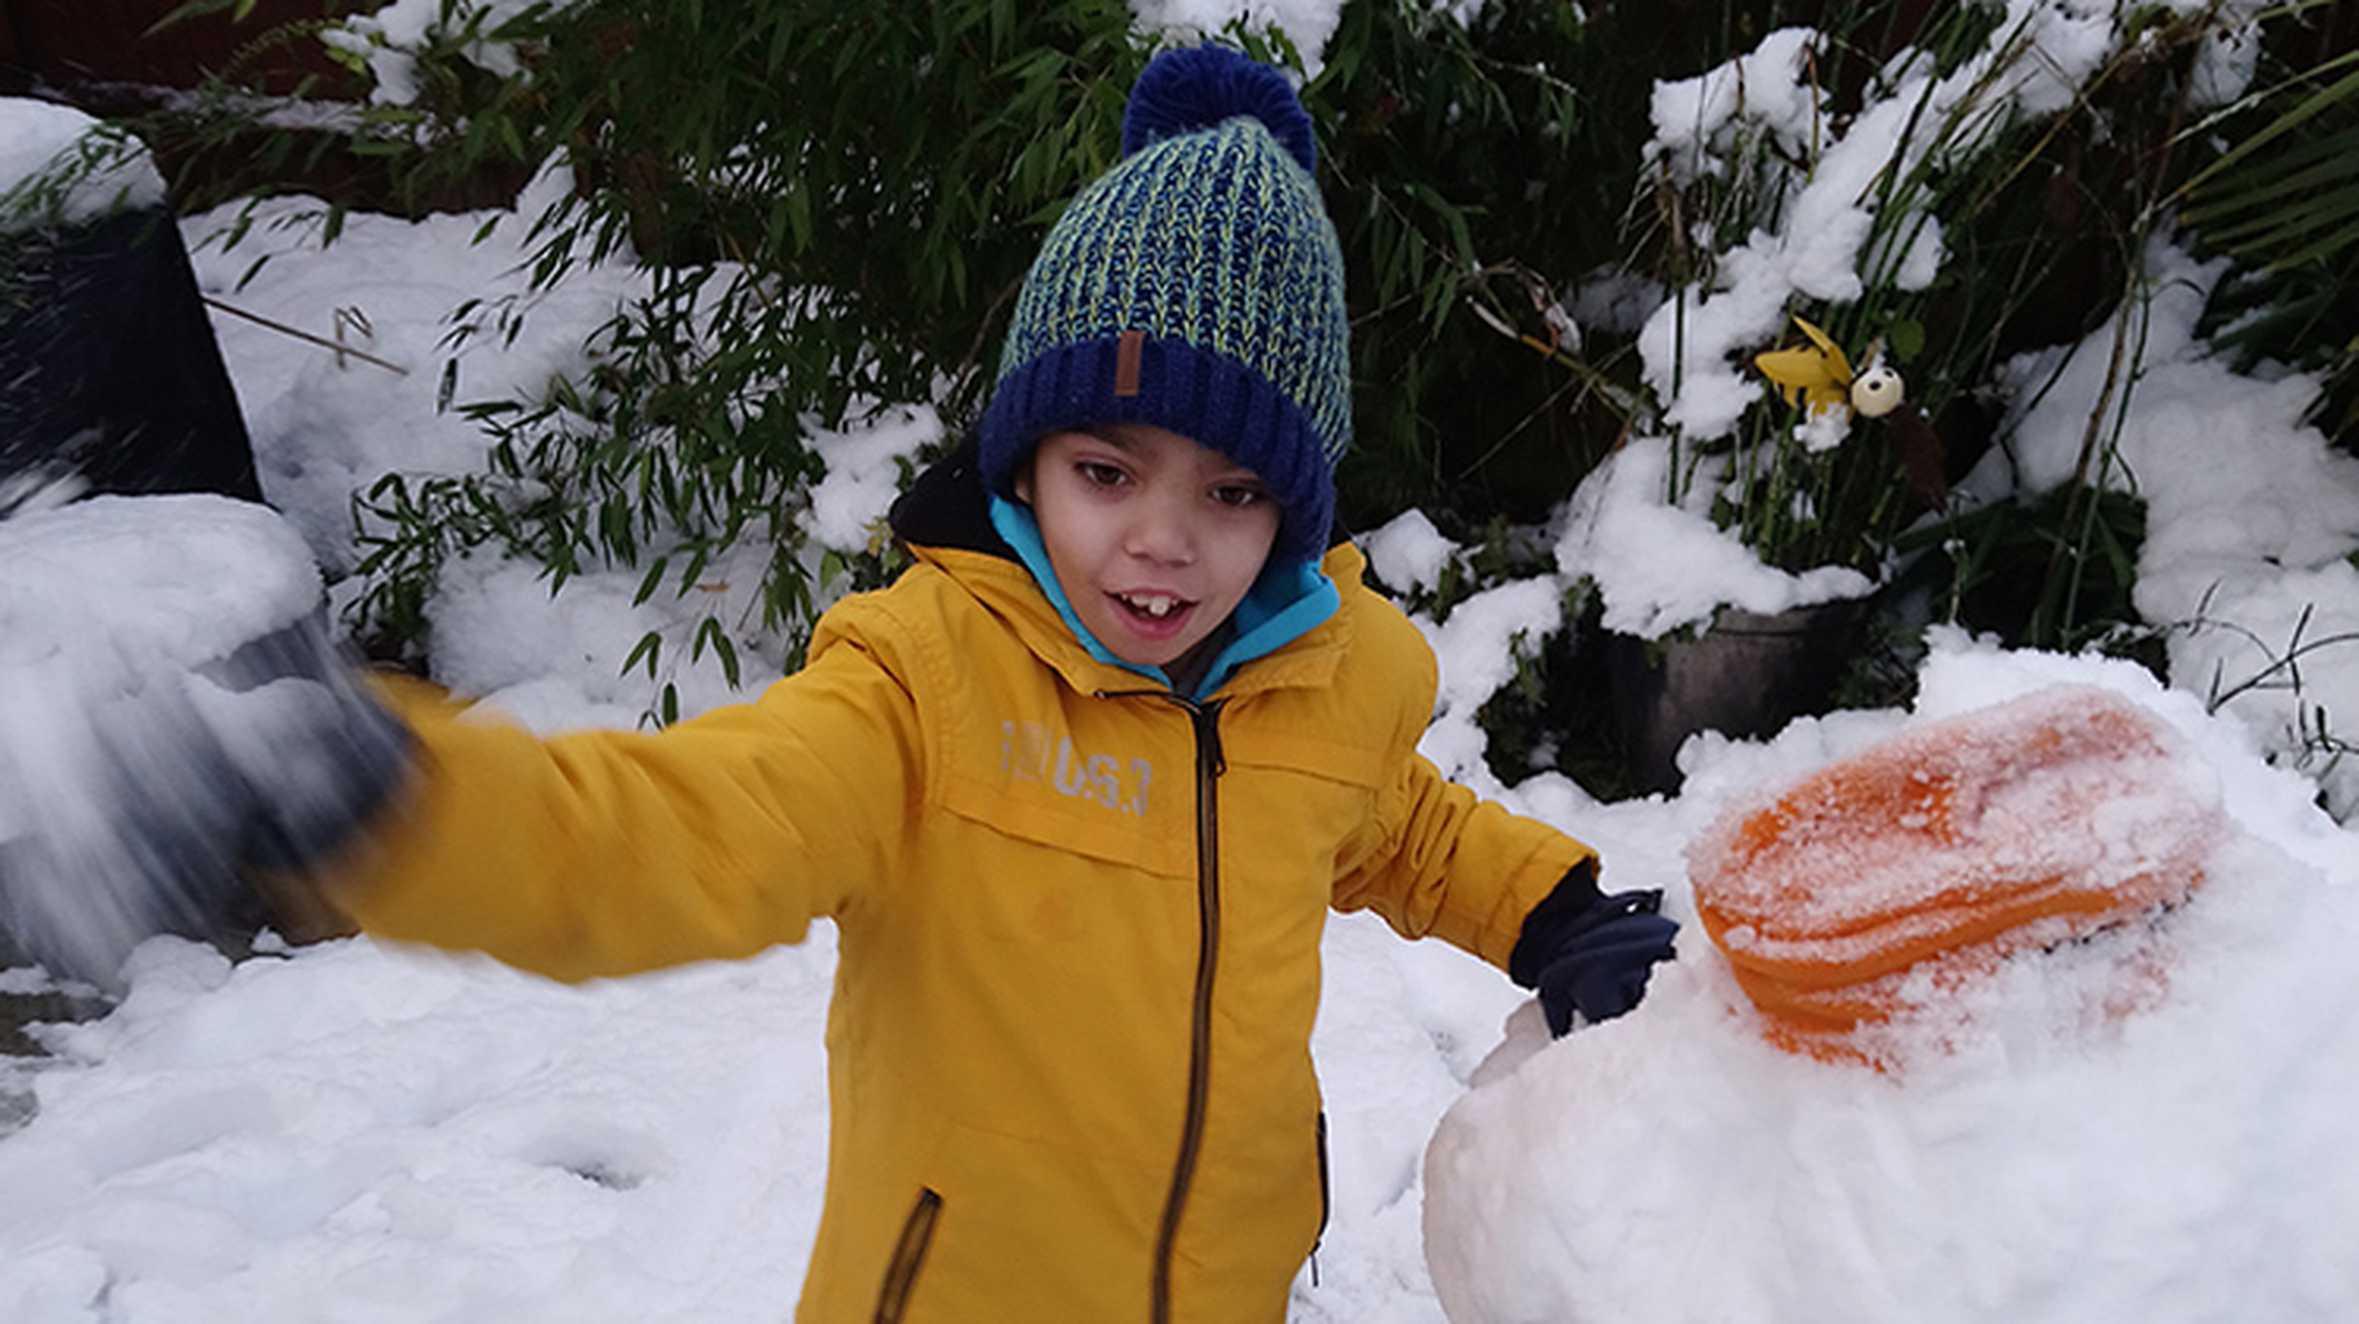 Zaid playing in the snow, dressed in a yellow jacket and blue bobble hat.